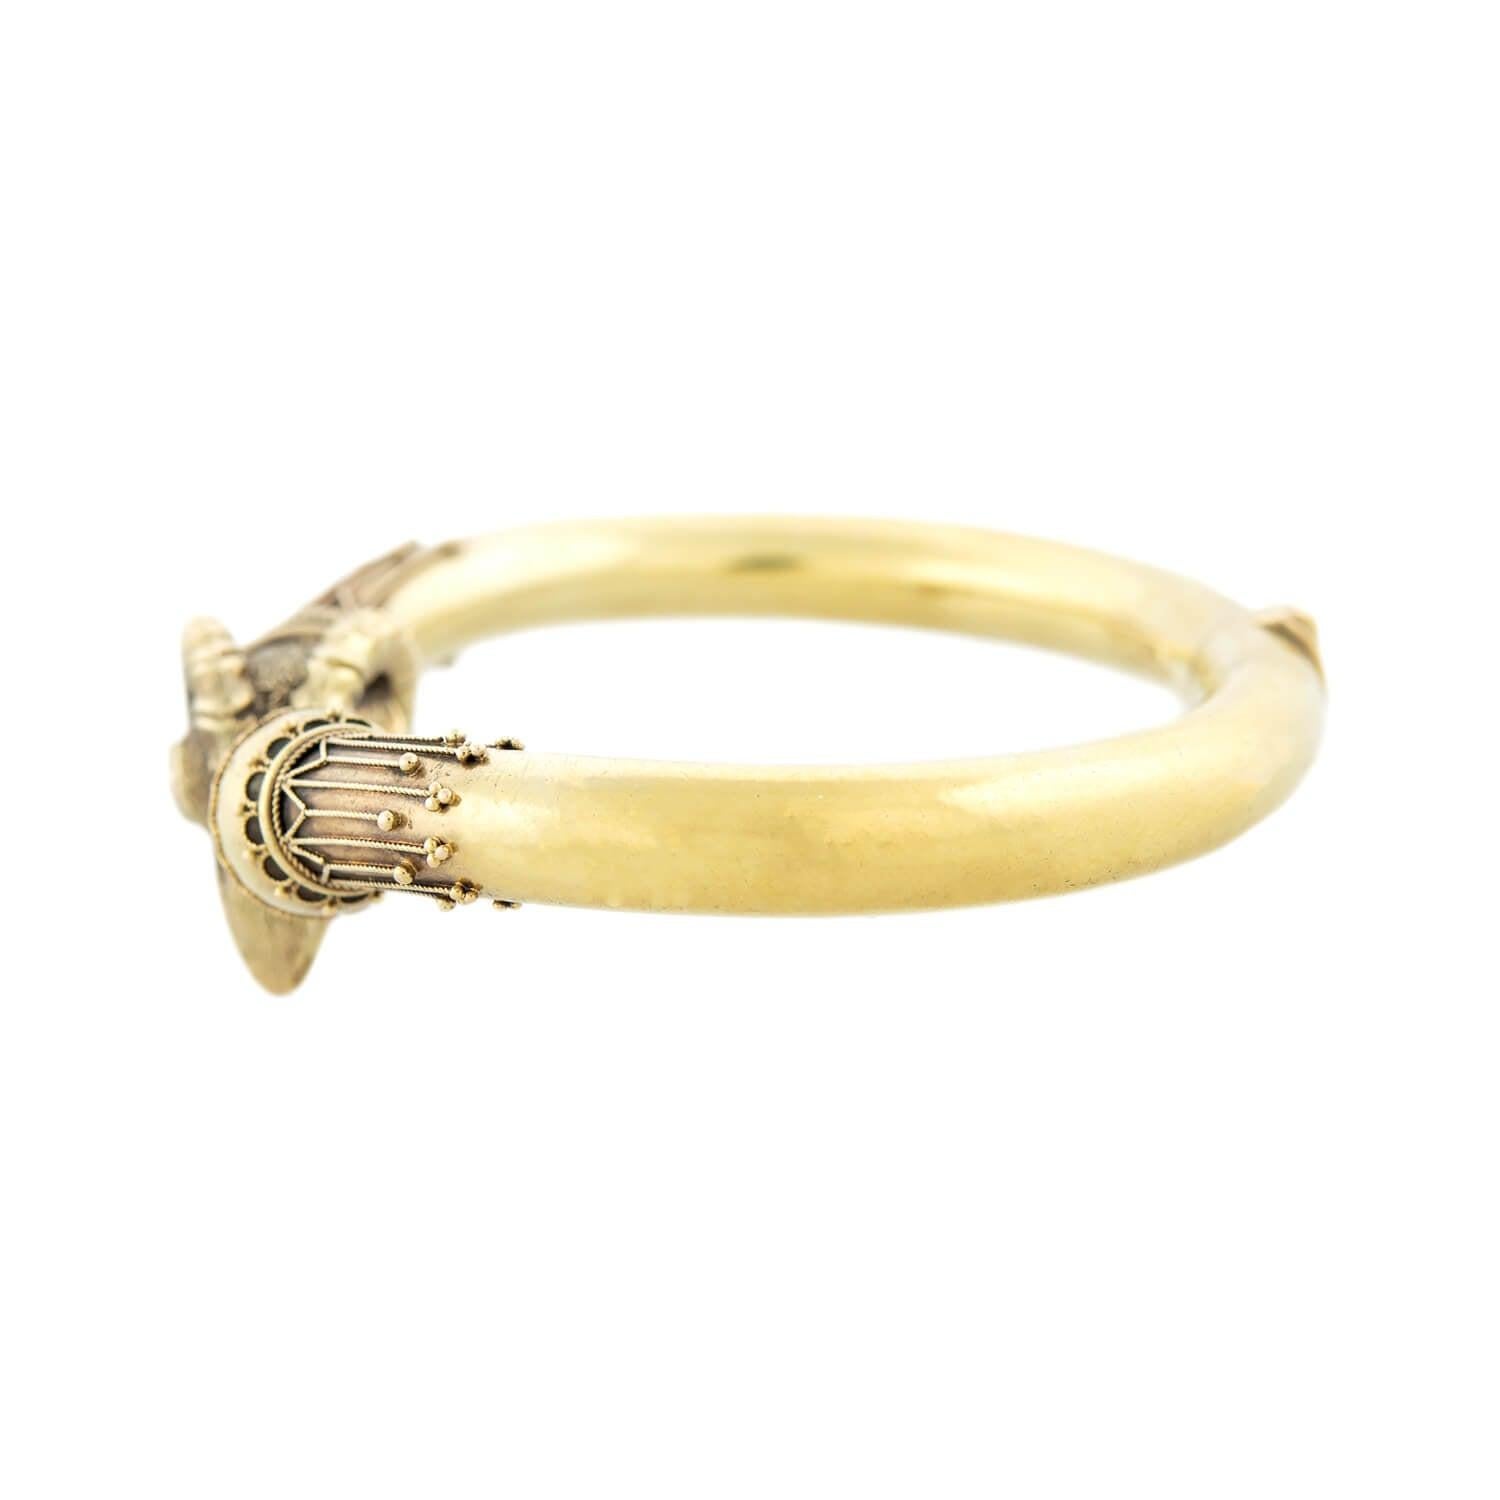 An impressive statement bracelet from the Victorian (ca1890) era! Crafted in 18kt gold, the bangle incorporates a realistic ram's head motif into a stylish Etruscan design. Each 3-dimensional ram's head is incredibly detailed, including curling